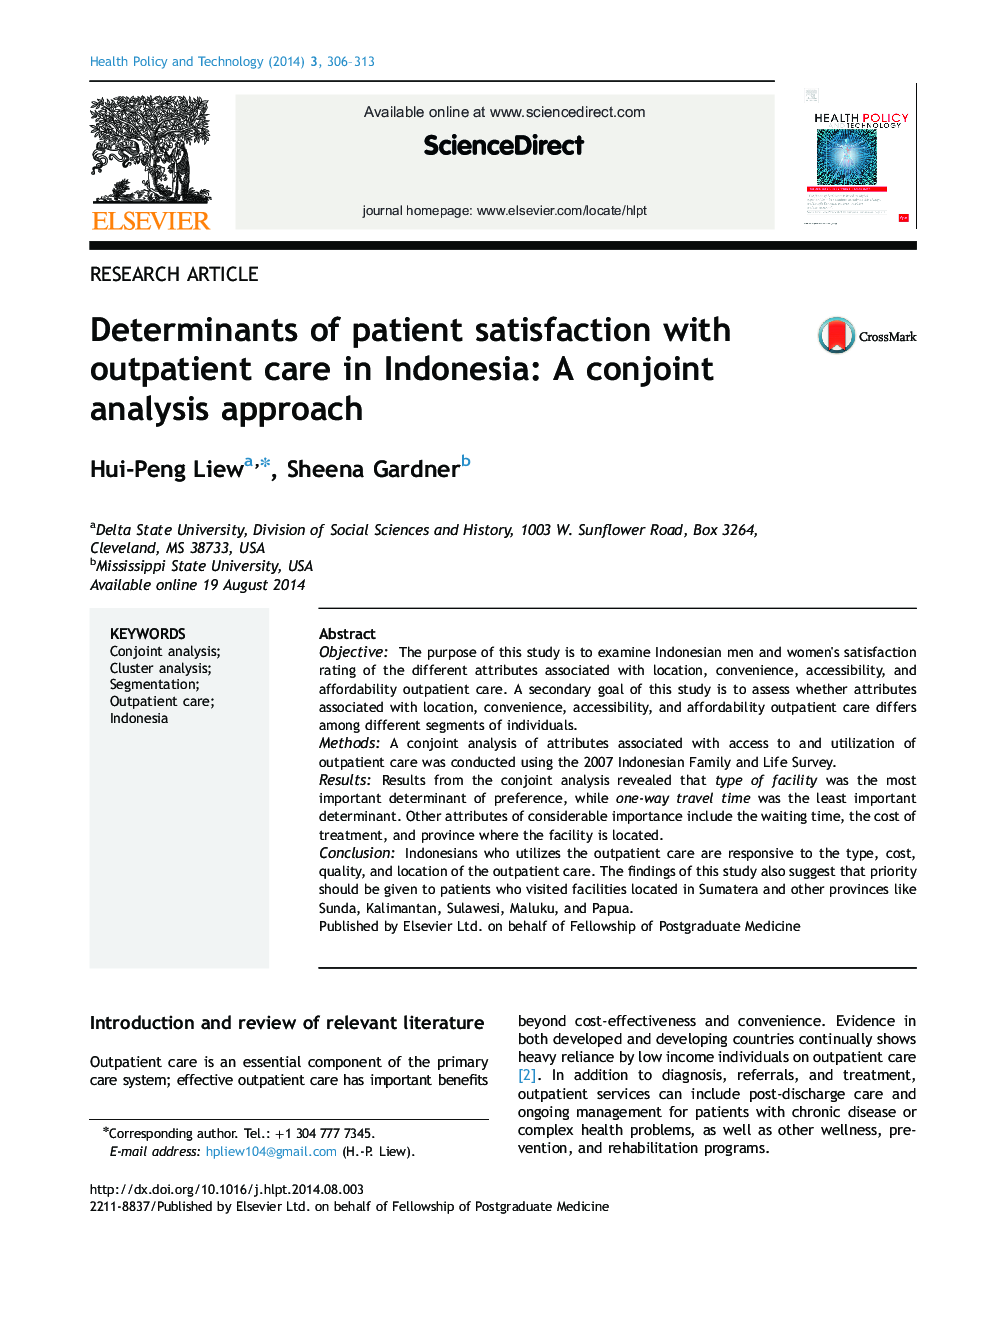 Determinants of patient satisfaction with outpatient care in Indonesia: A conjoint analysis approach